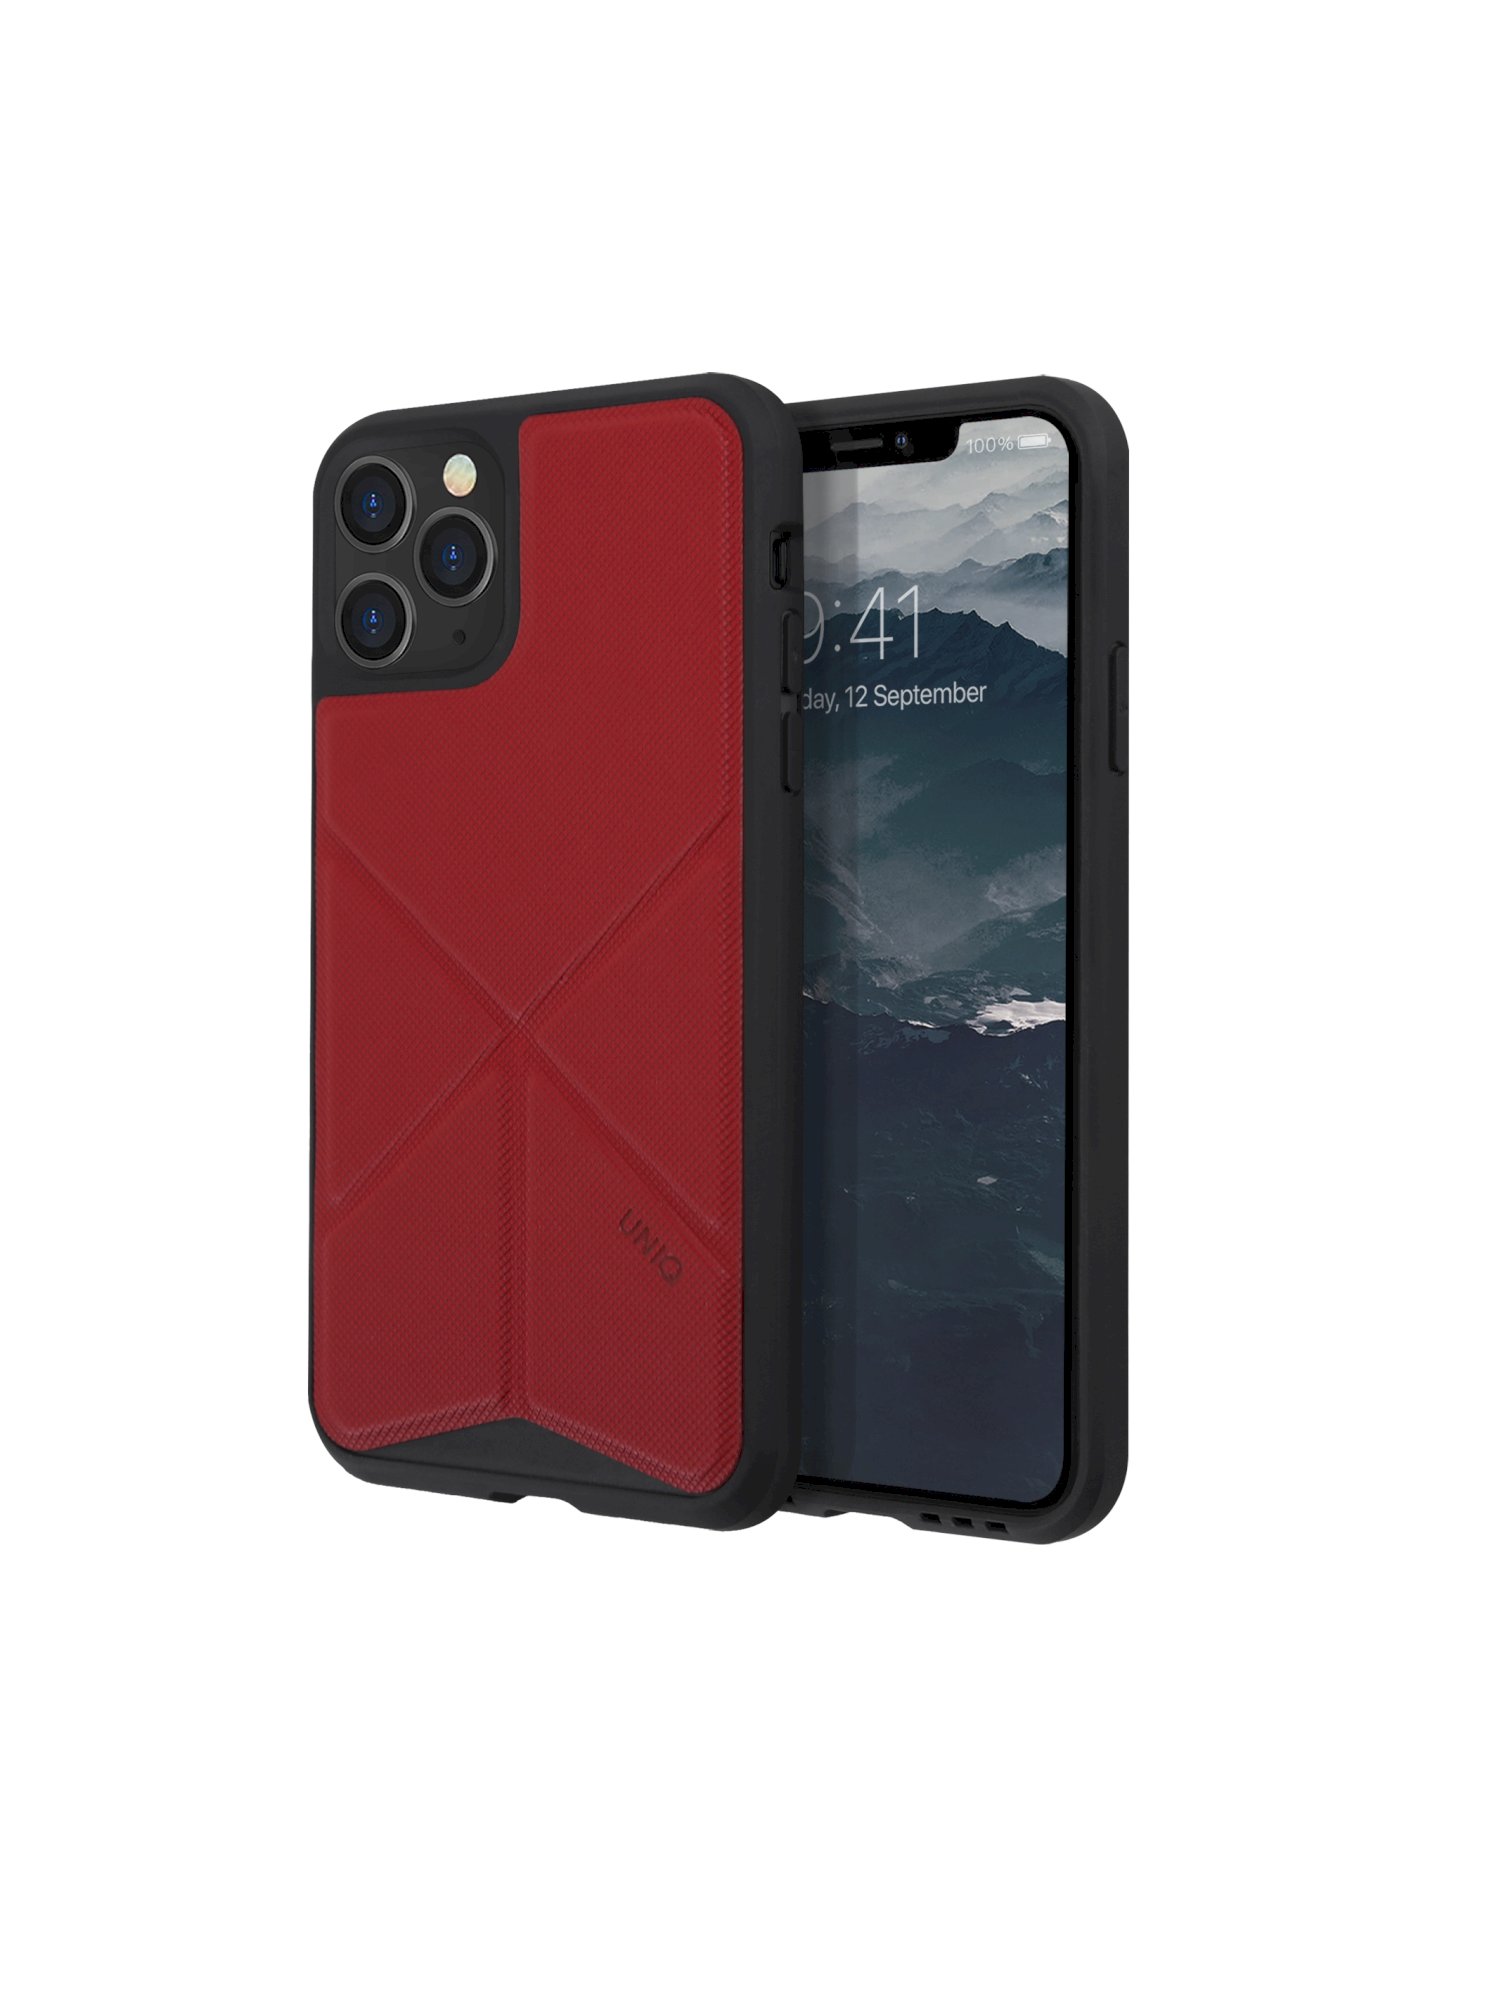 iPhone 11 Pro, hoesje transforma, stand up fury racer, rood